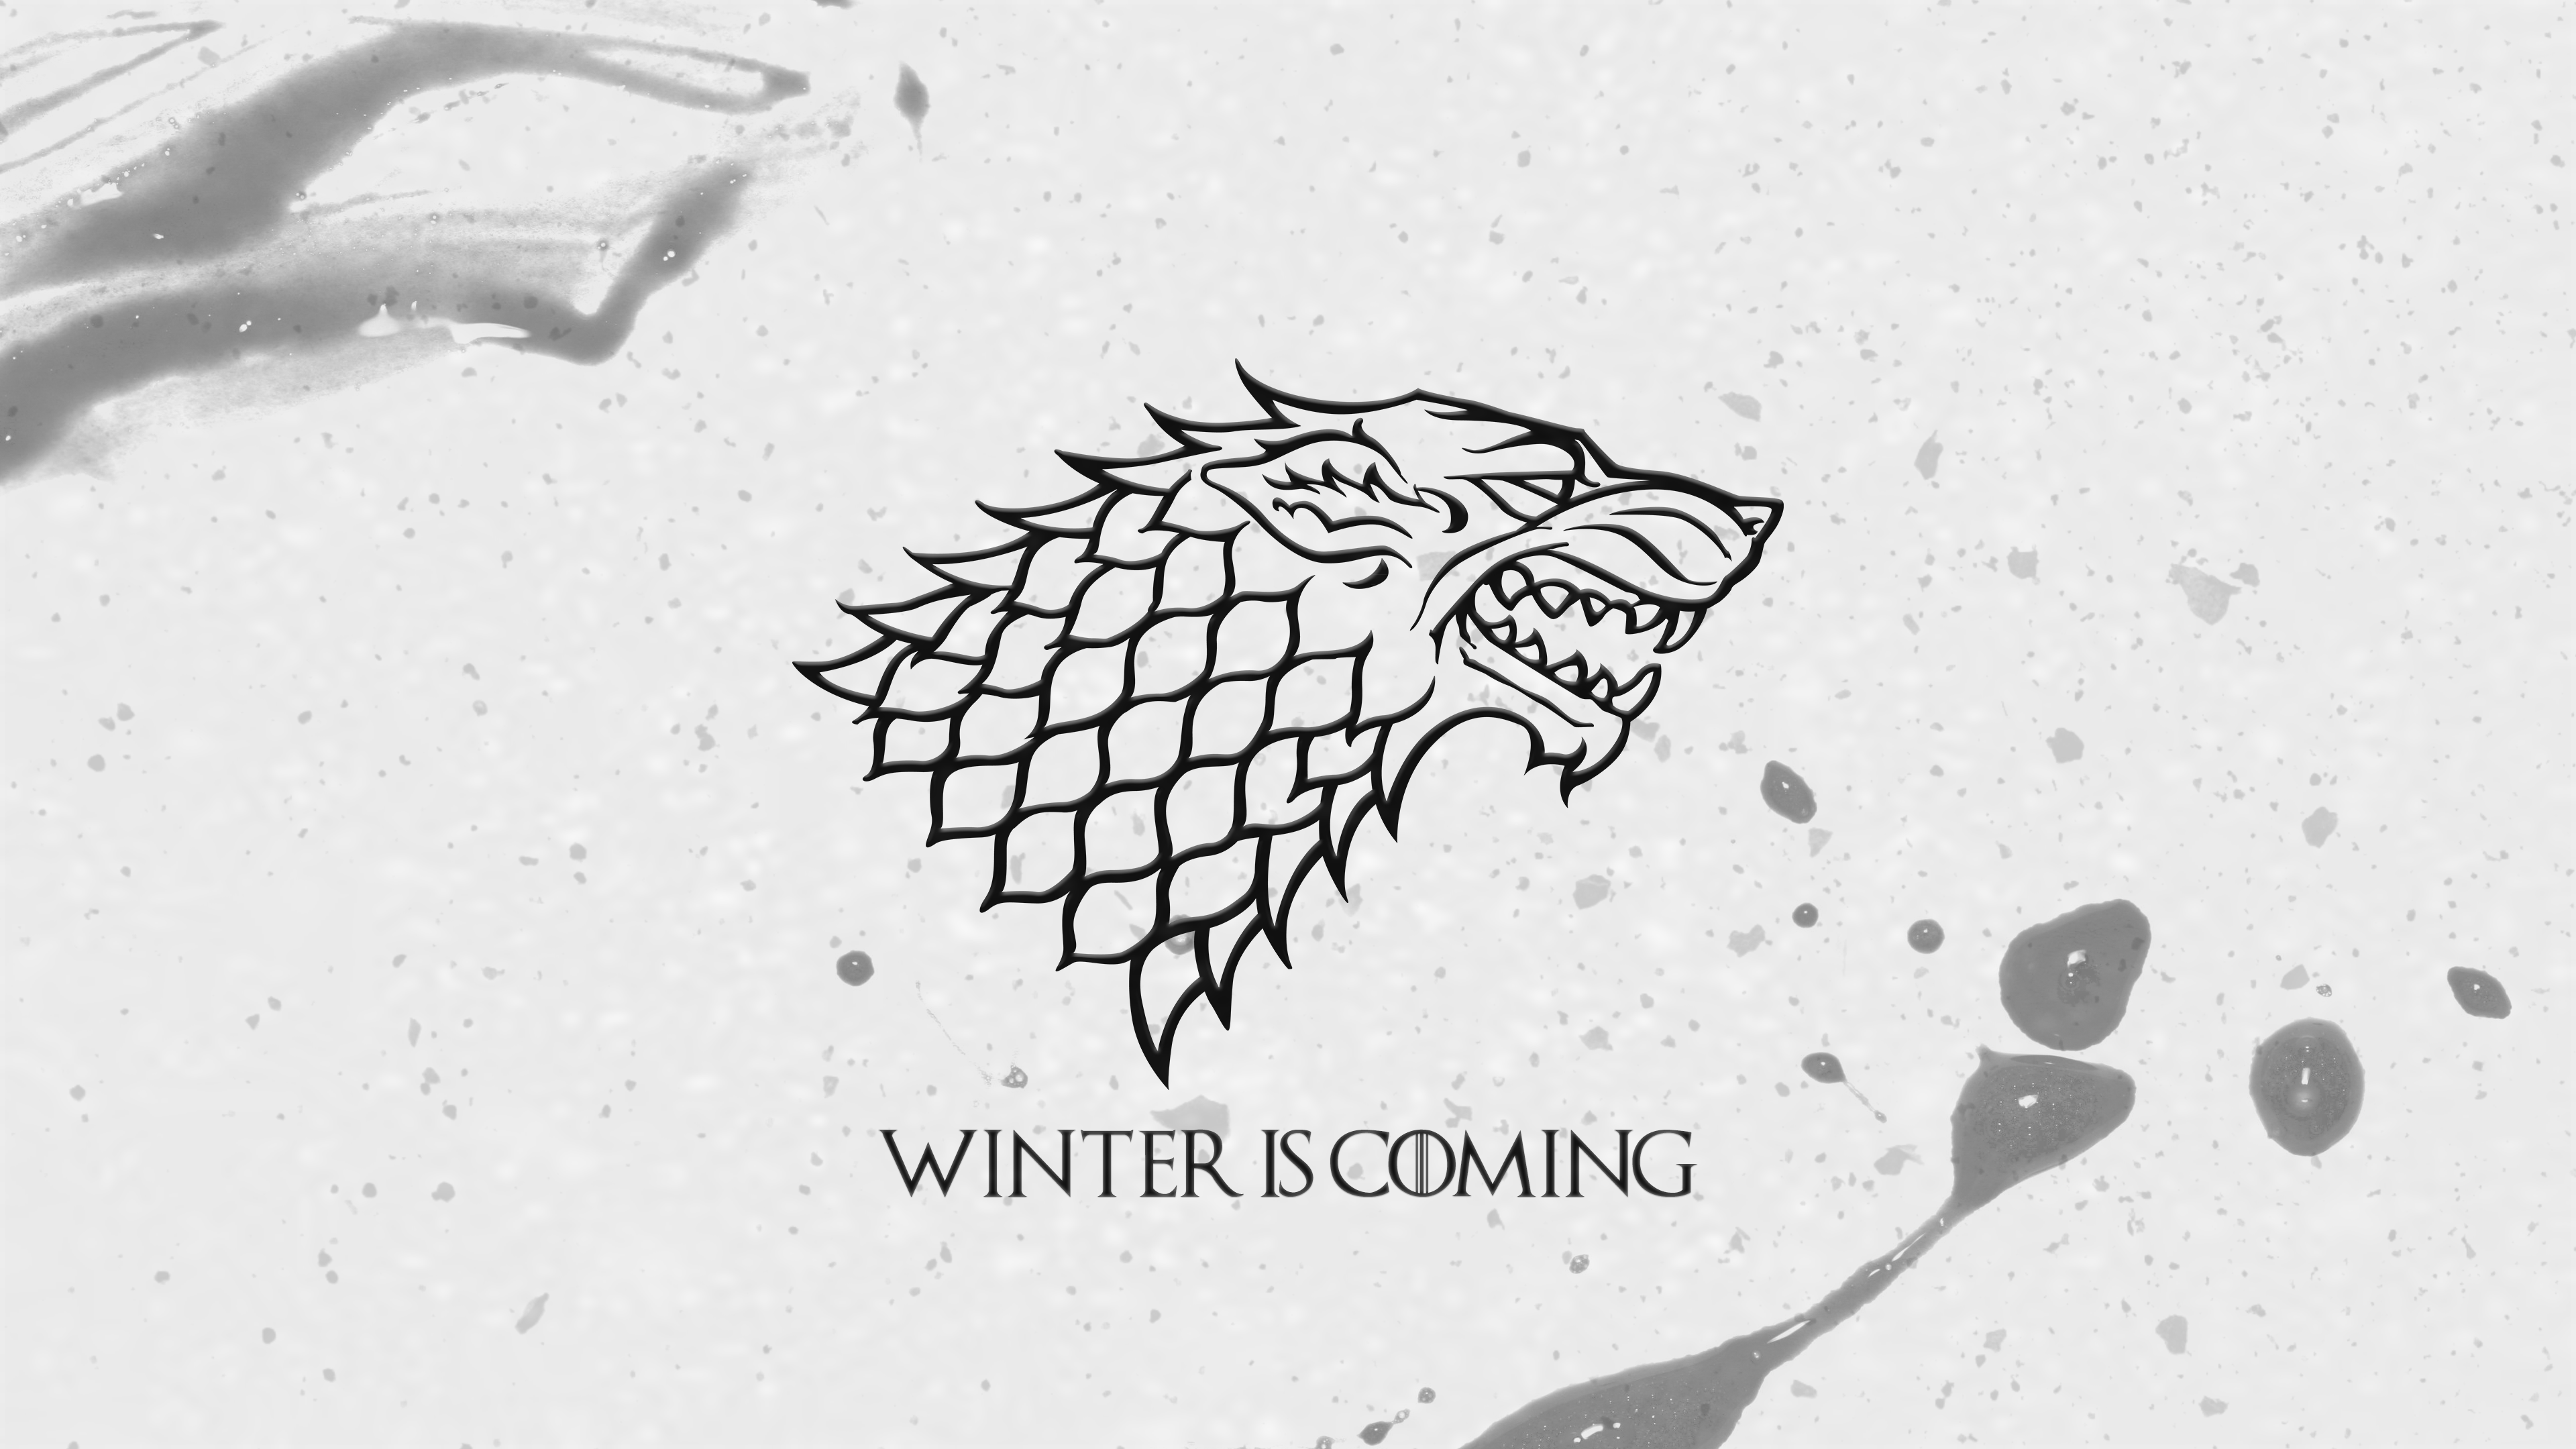 Game Of Thrones A Song Of Ice And Fire Jon Snow House Stark Winter Is Coming 3840x2160